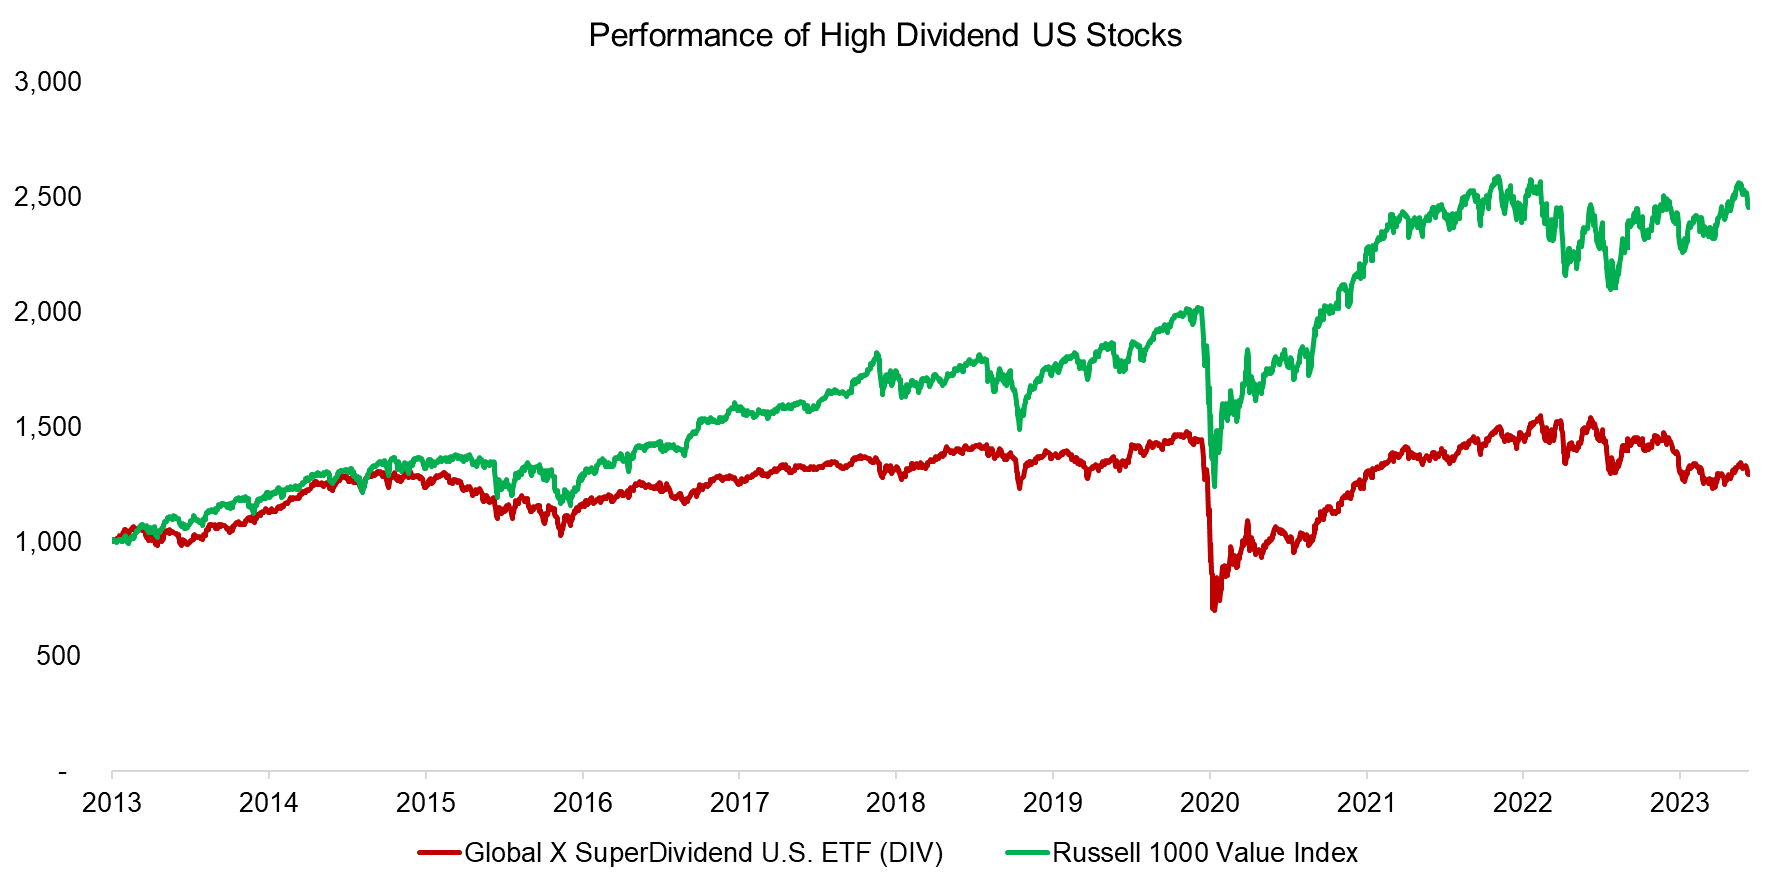 Performance of High Dividend US Stocks